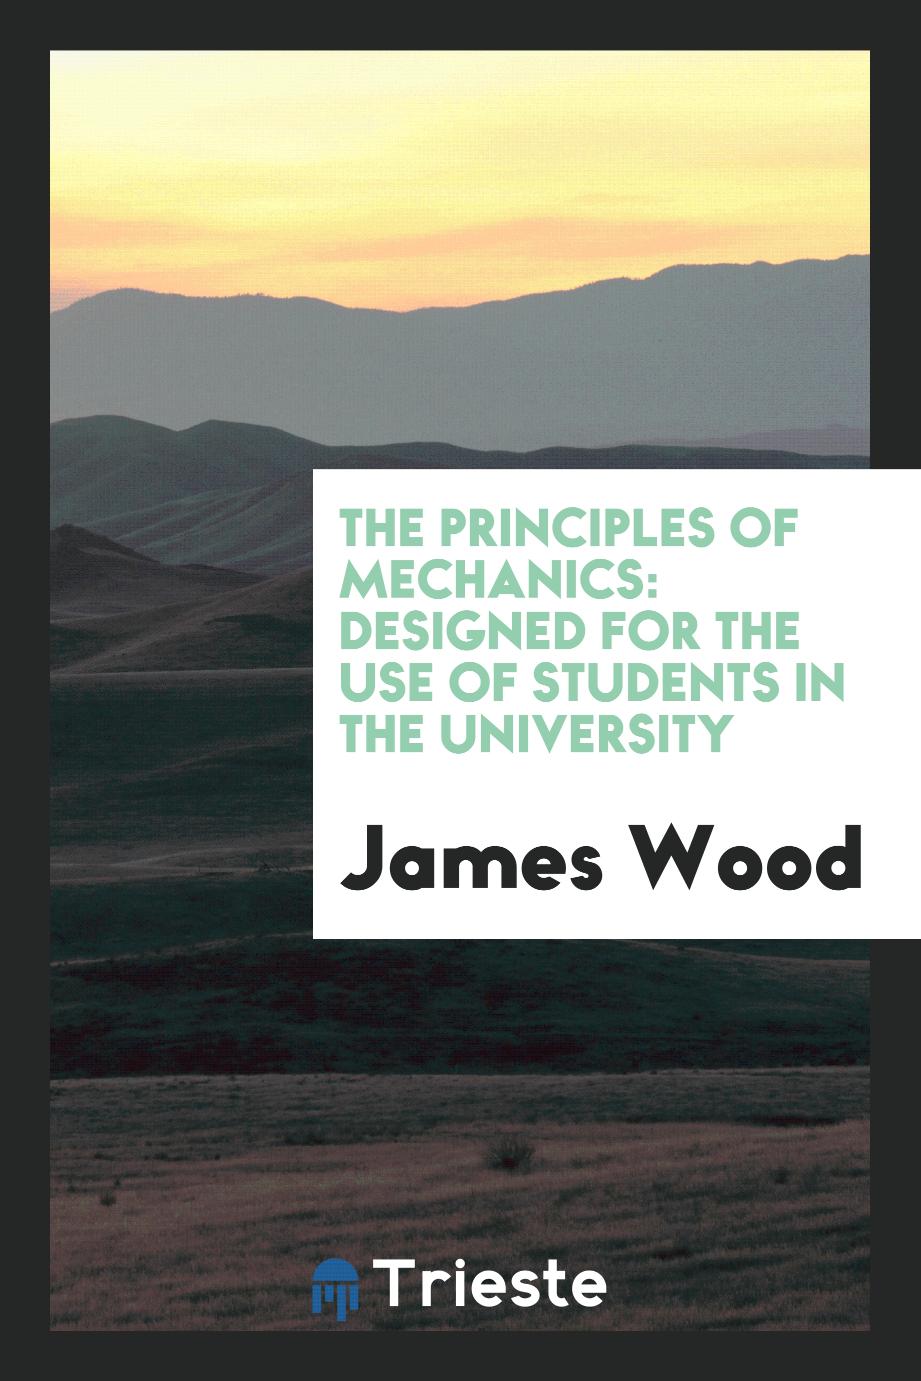 The Principles of Mechanics: Designed for the Use of Students in the University